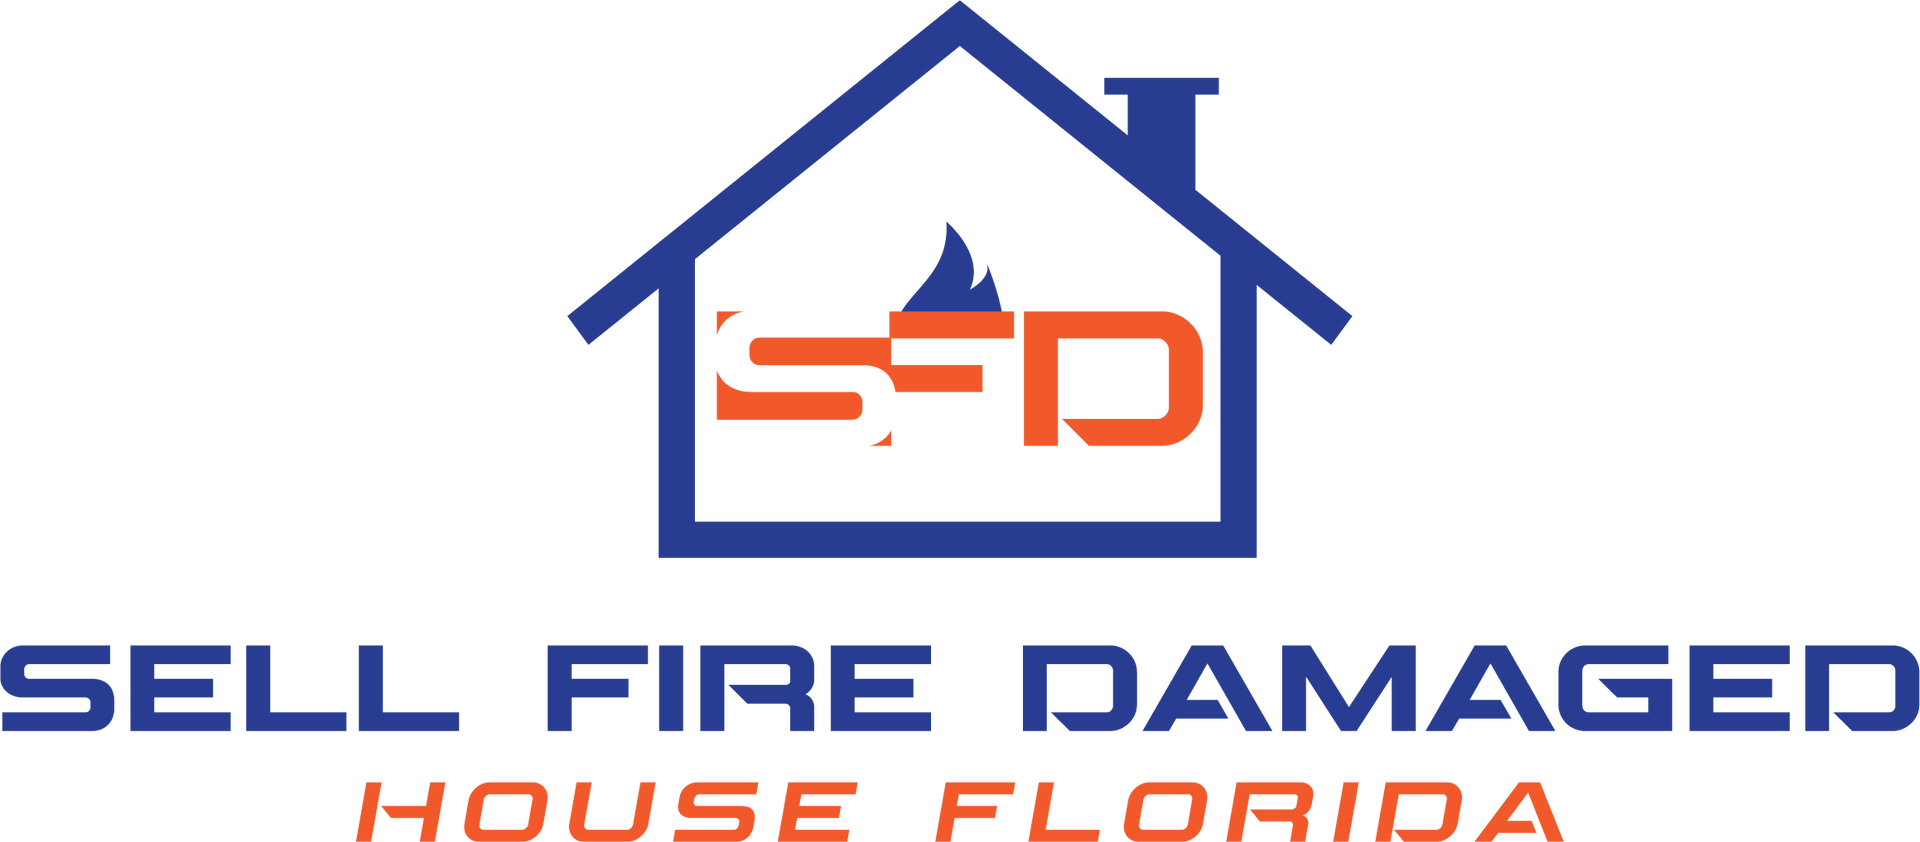 Sell Fire Damaged House Florida